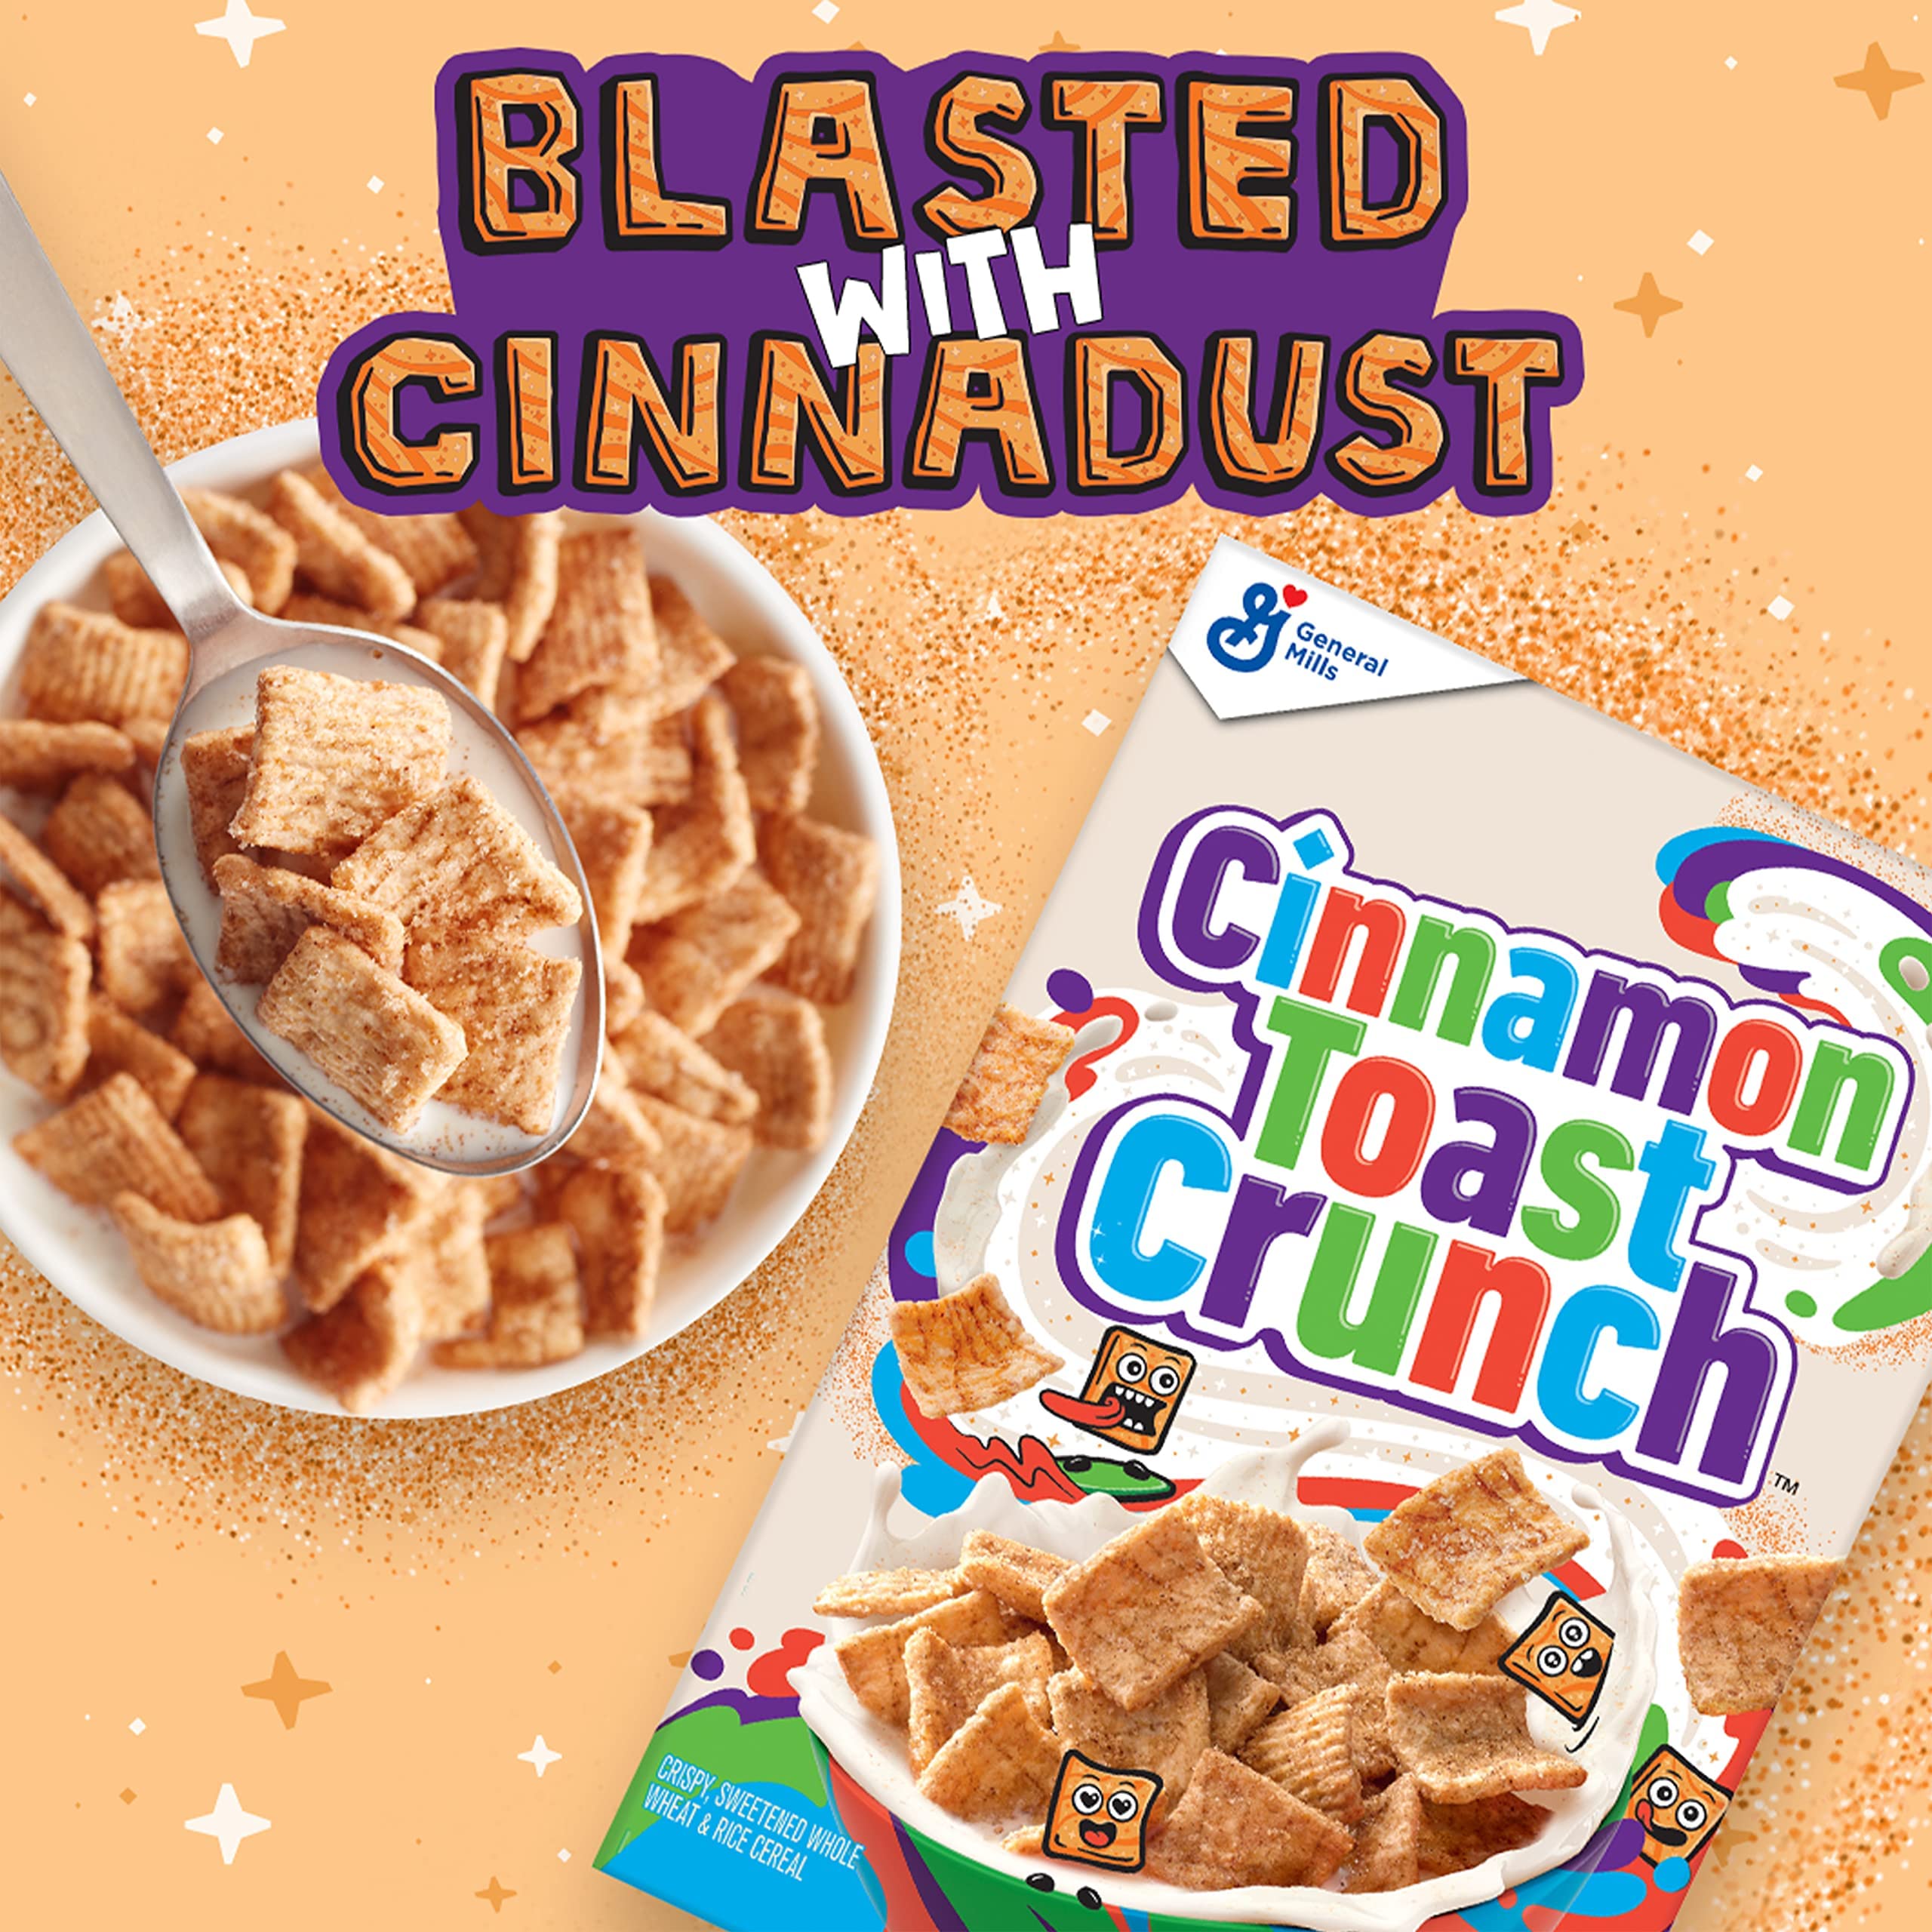 Cinnamon Toast Crunch Breakfast Cereal Cup, 2 oz Cup (Pack of 12)